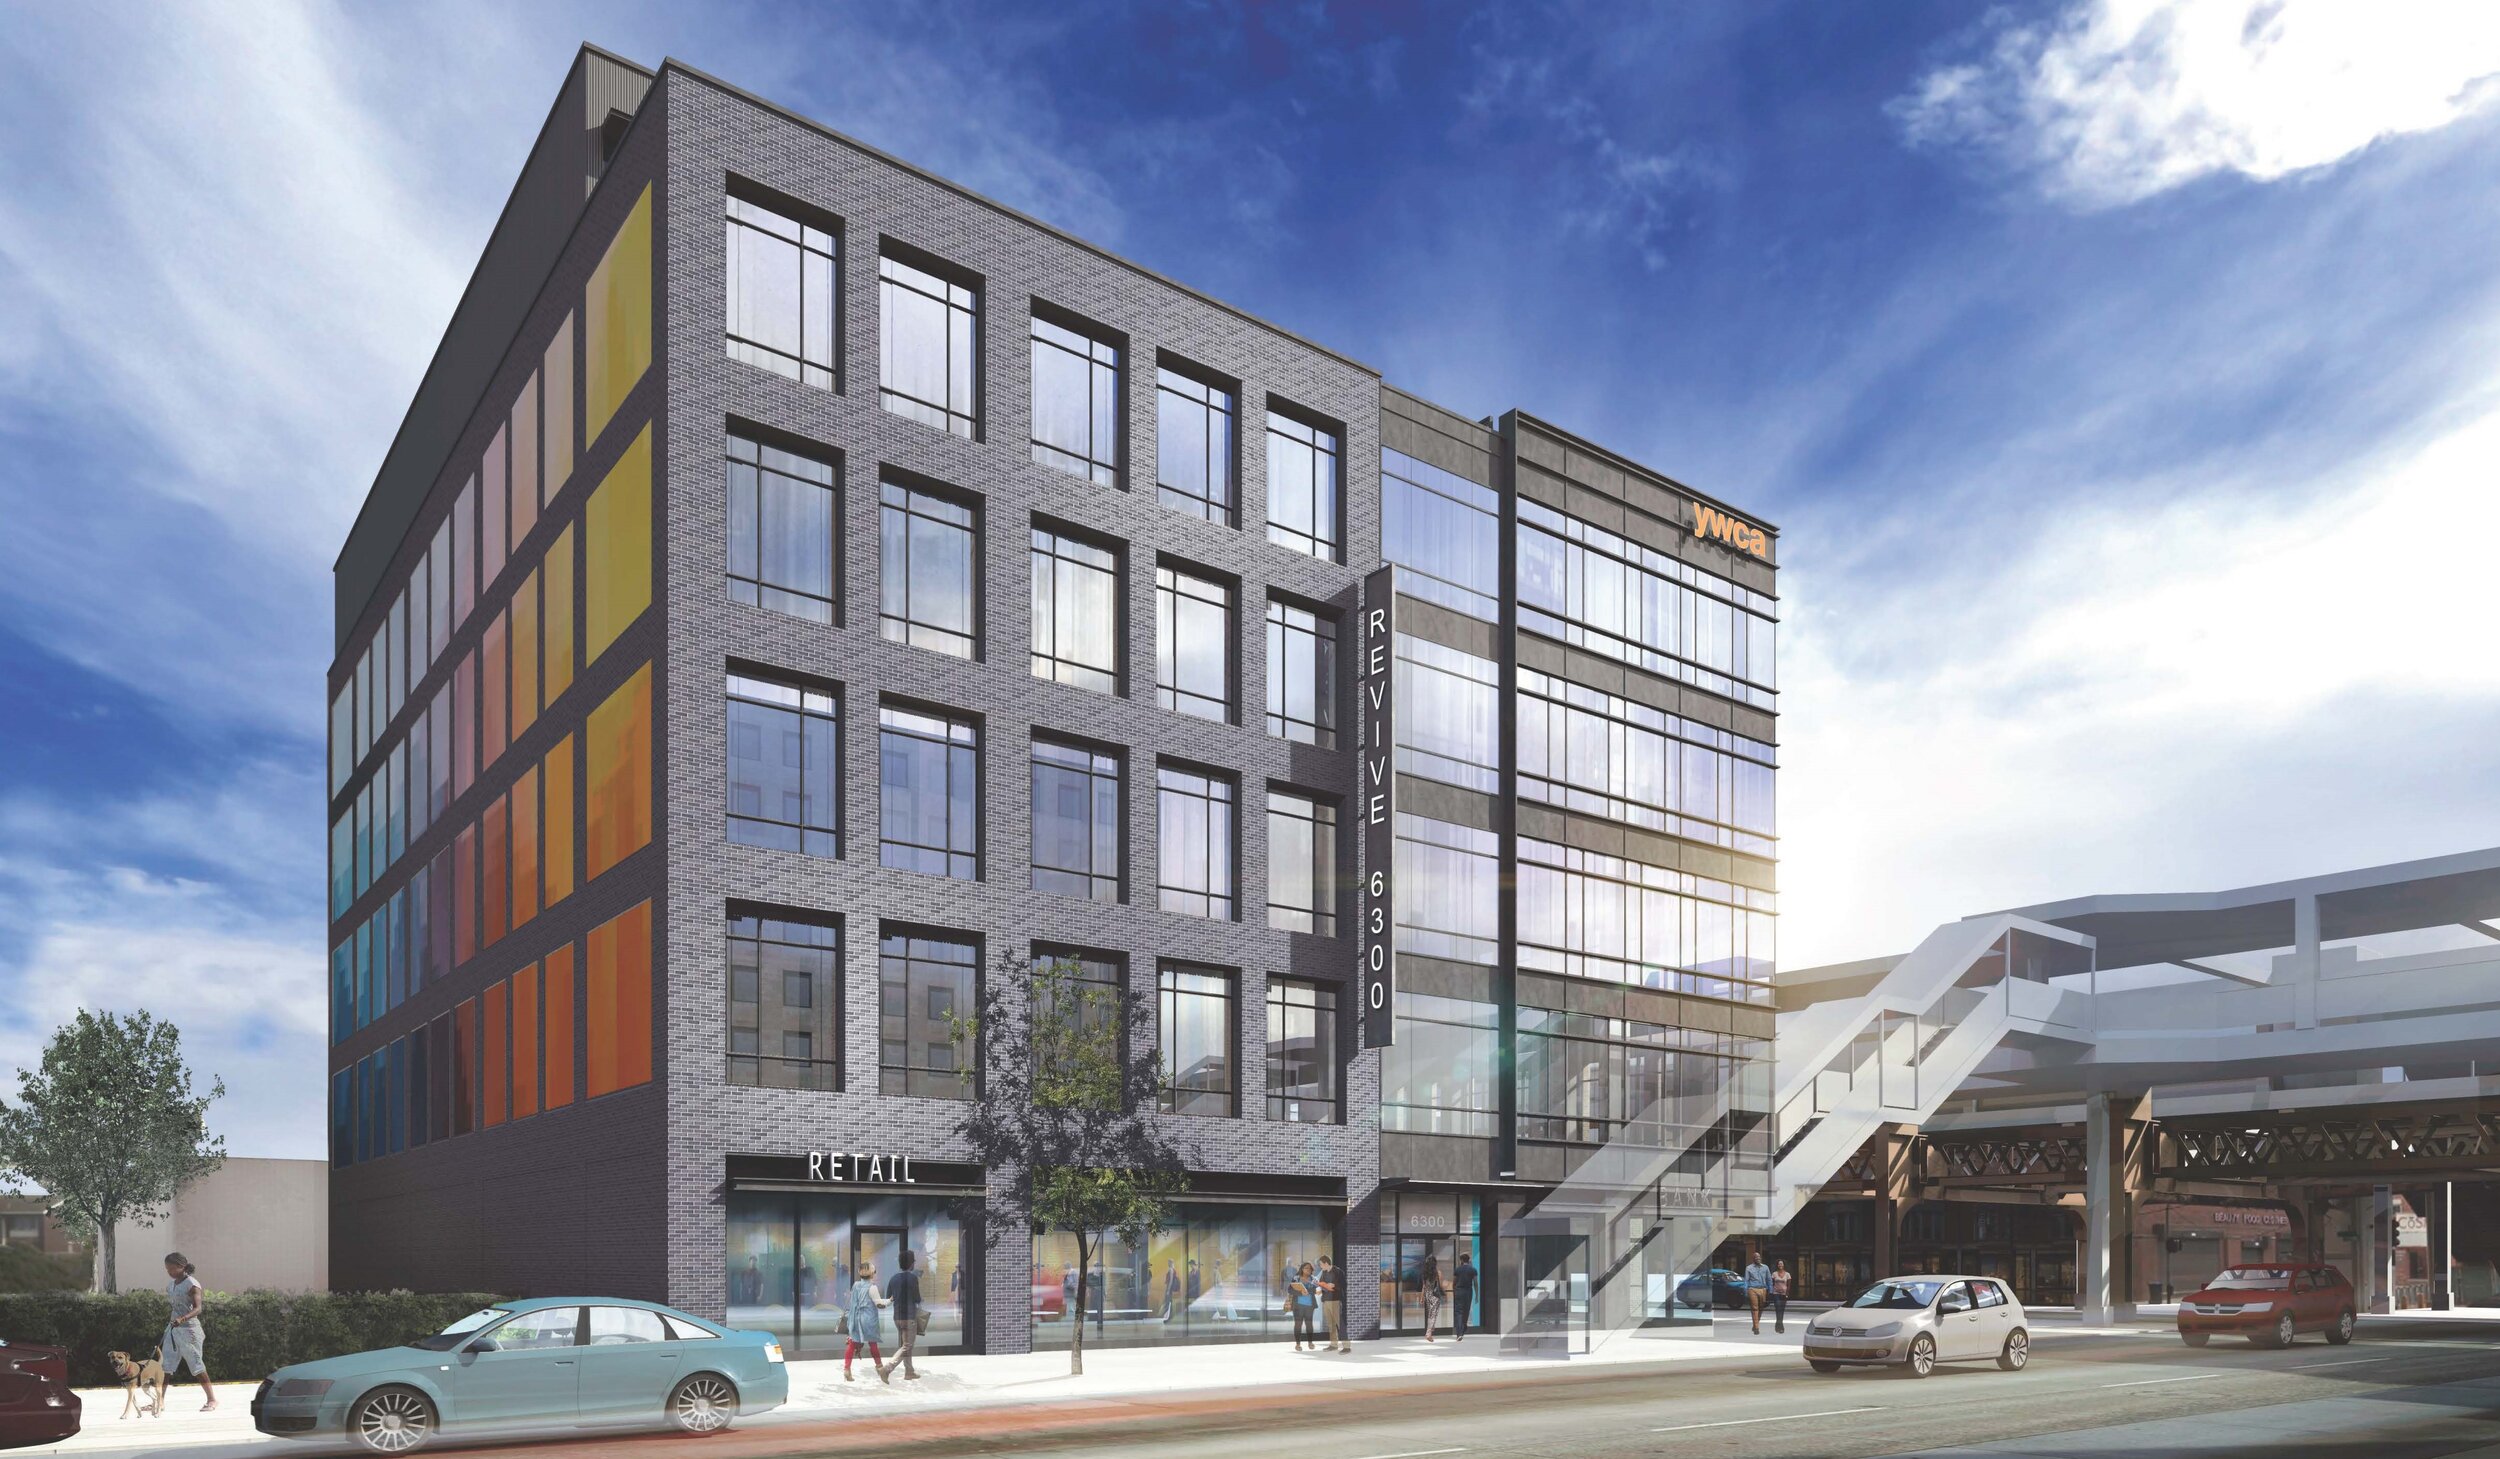 6300 S Cottage Grove Ave - Rendering - Building.jpg